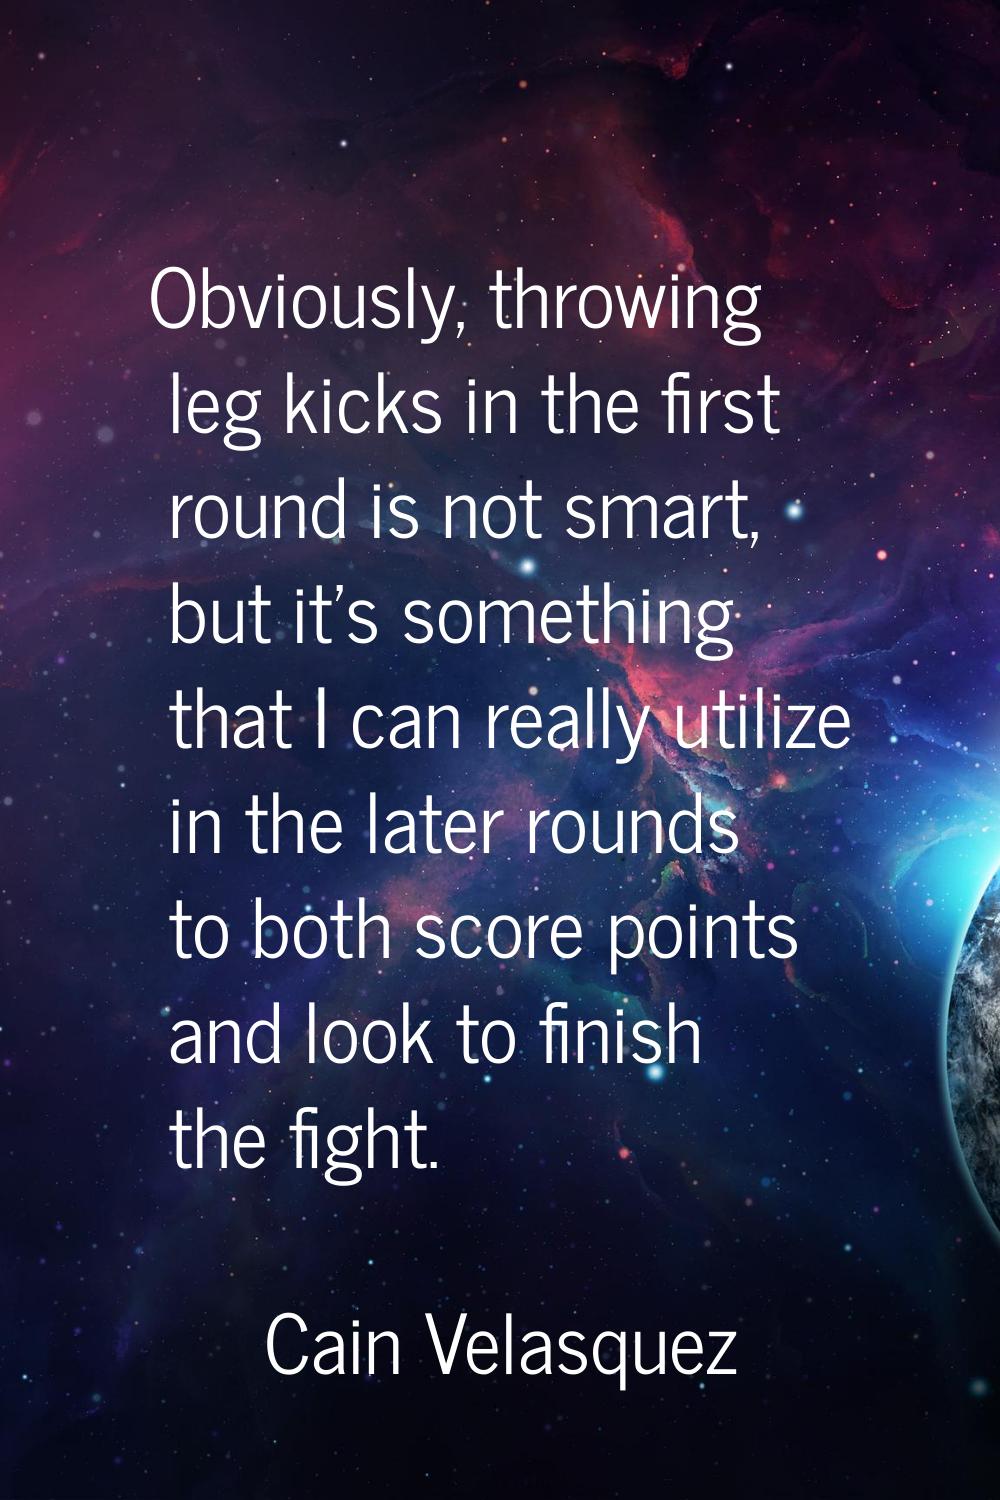 Obviously, throwing leg kicks in the first round is not smart, but it's something that I can really